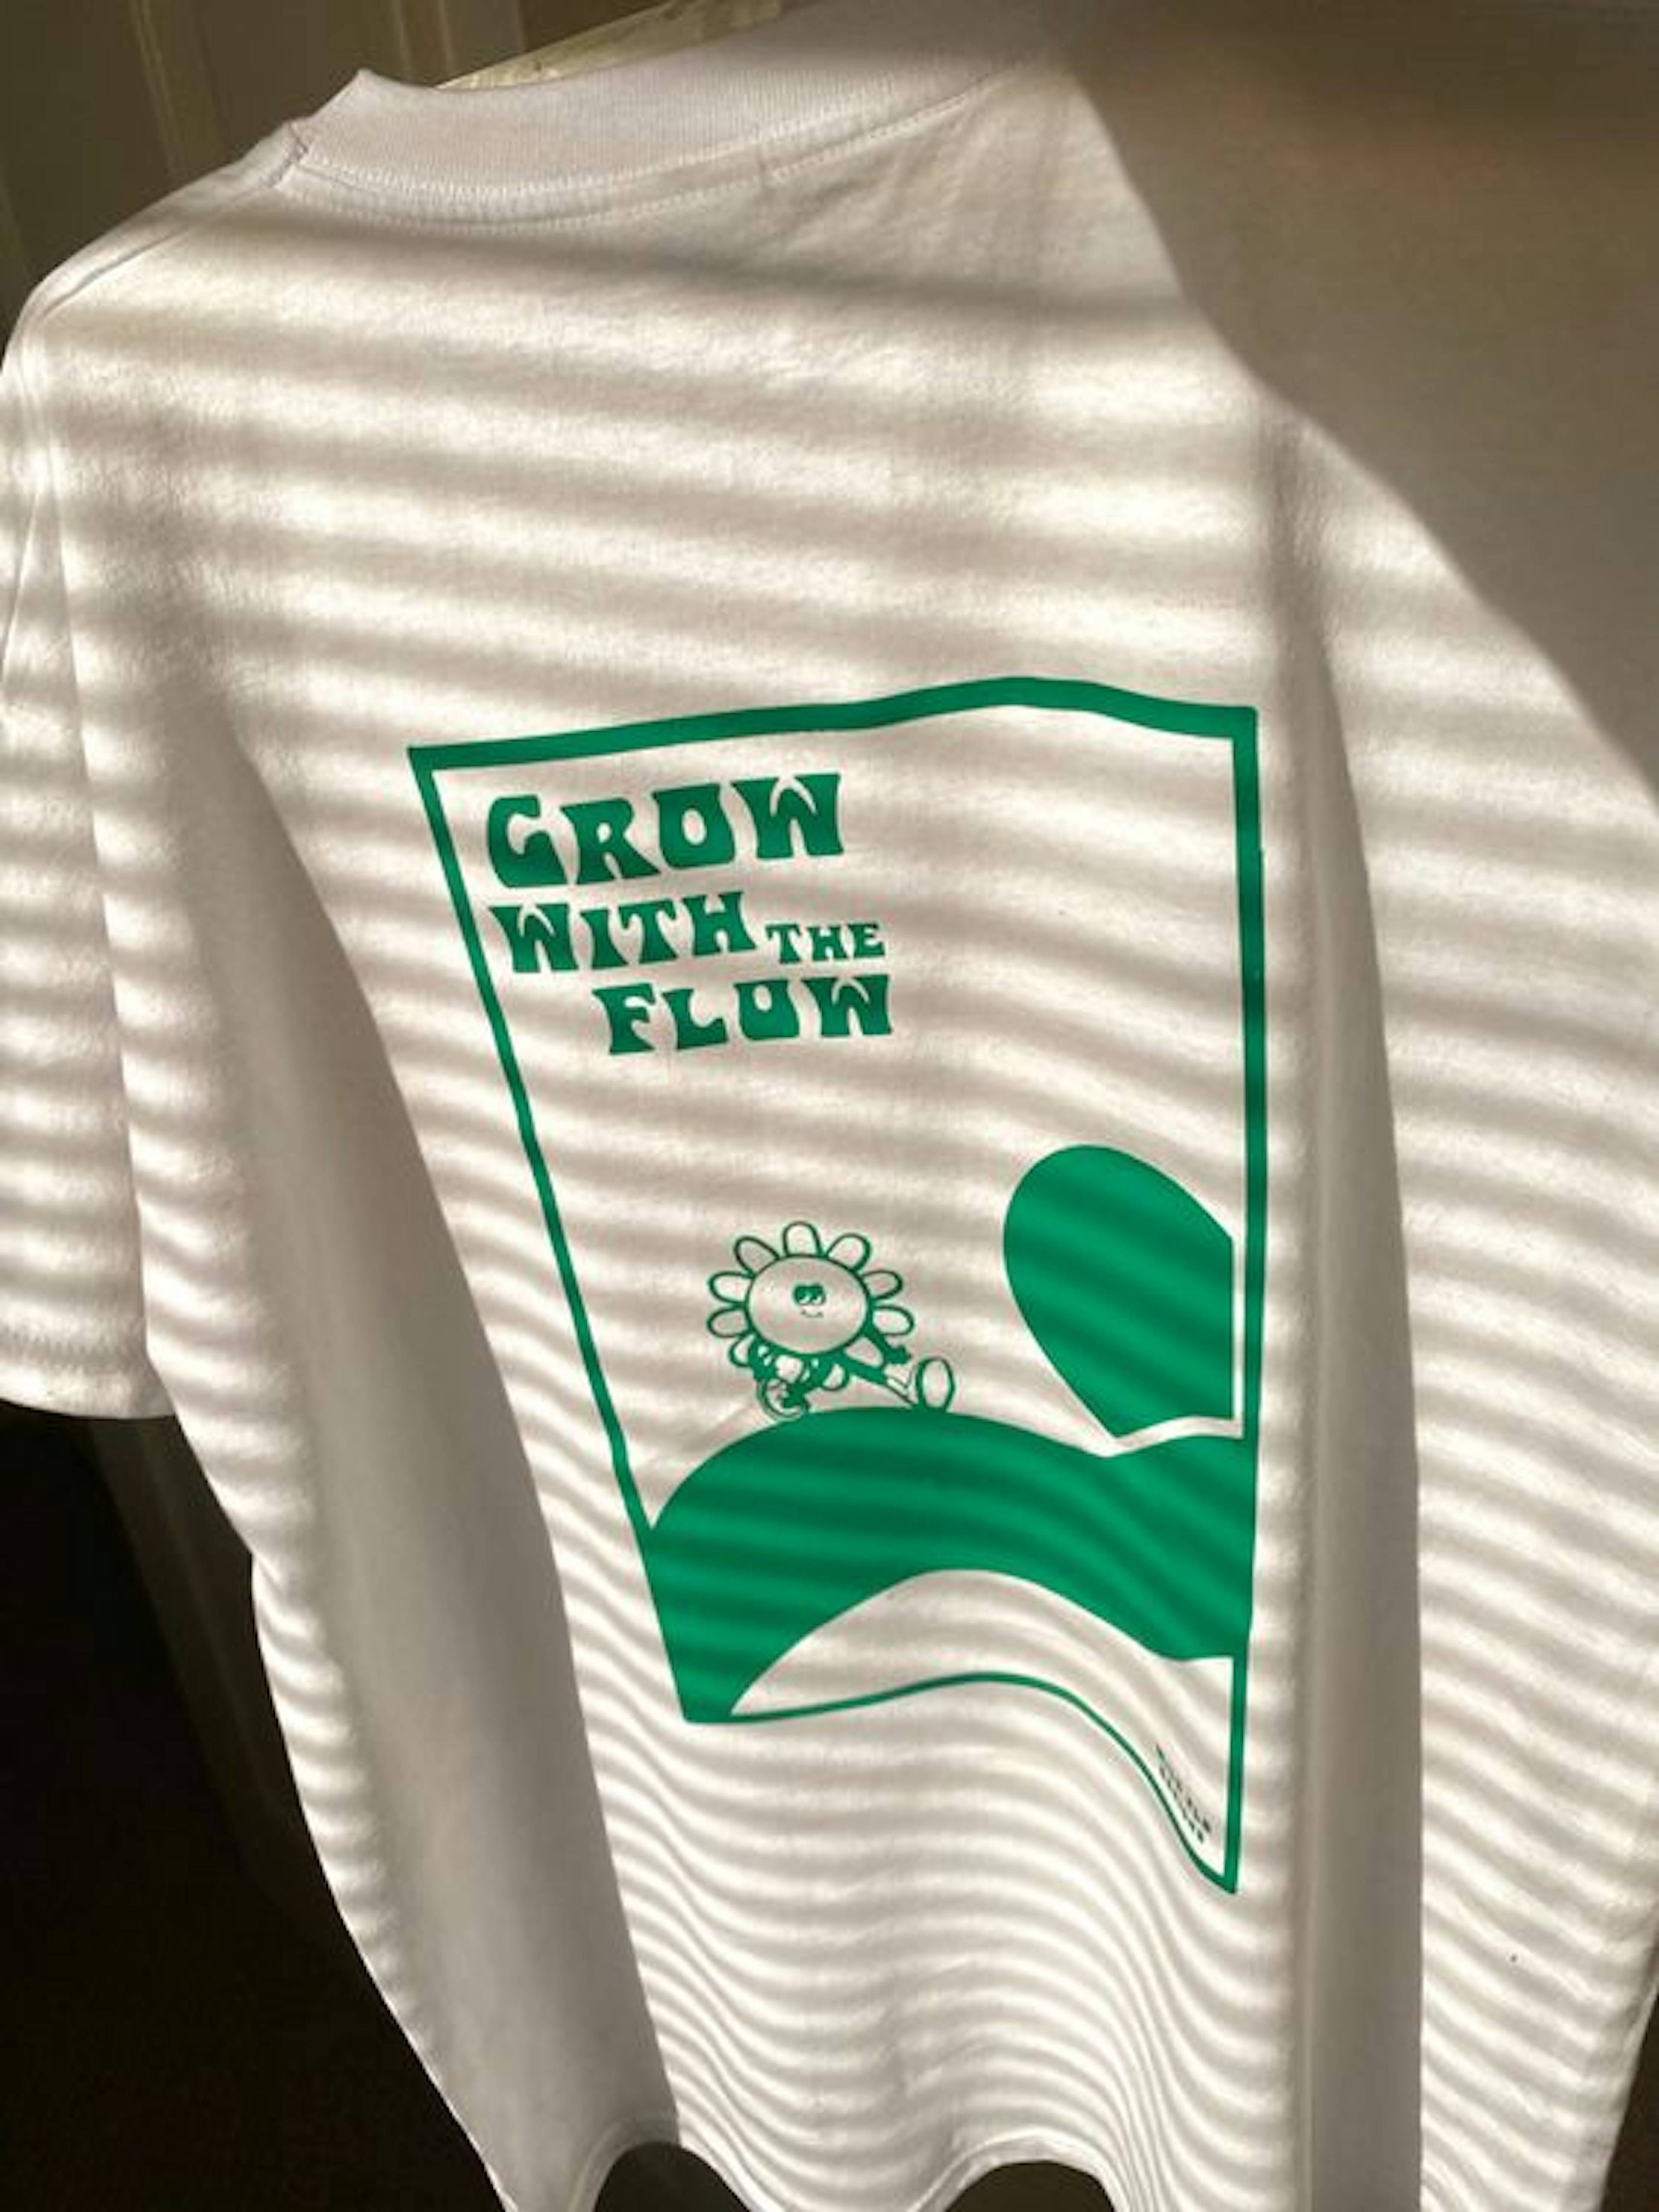 Grow with the flow tee